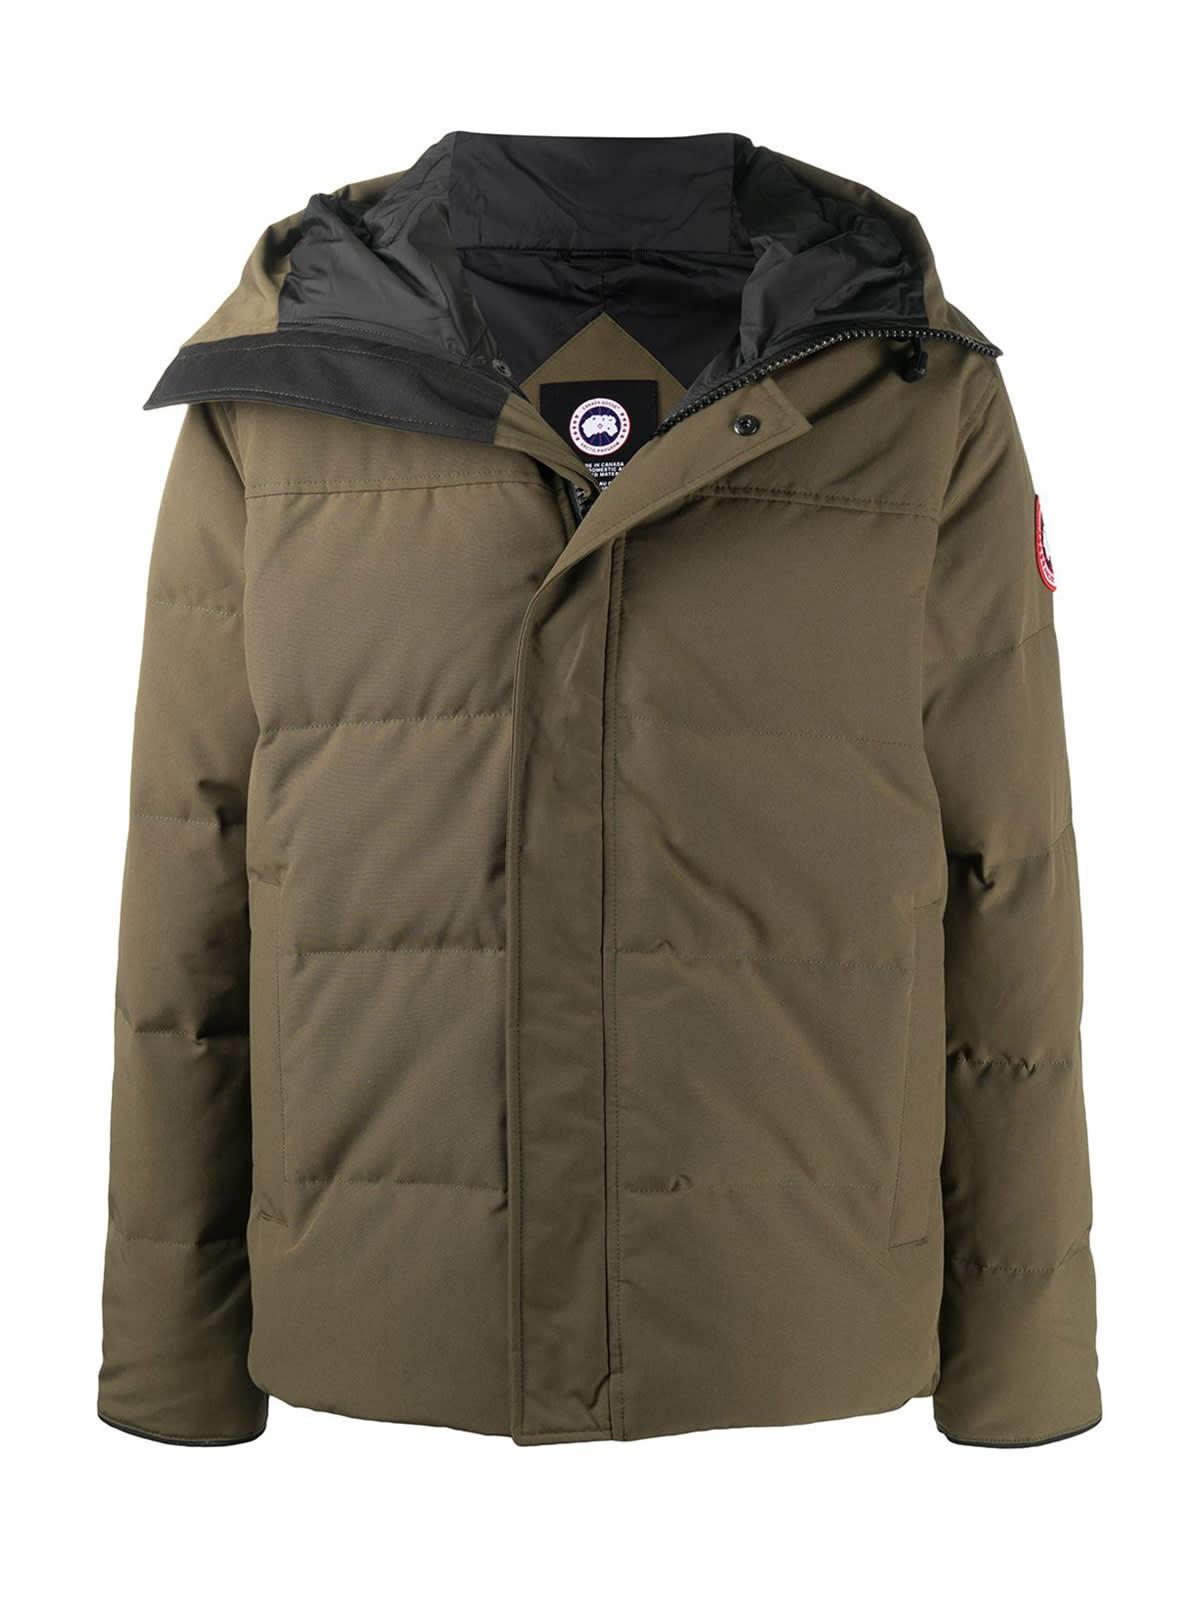 Canada Goose Macmillan Parka in Military Green (Green) for Men - Save 38% |  Lyst